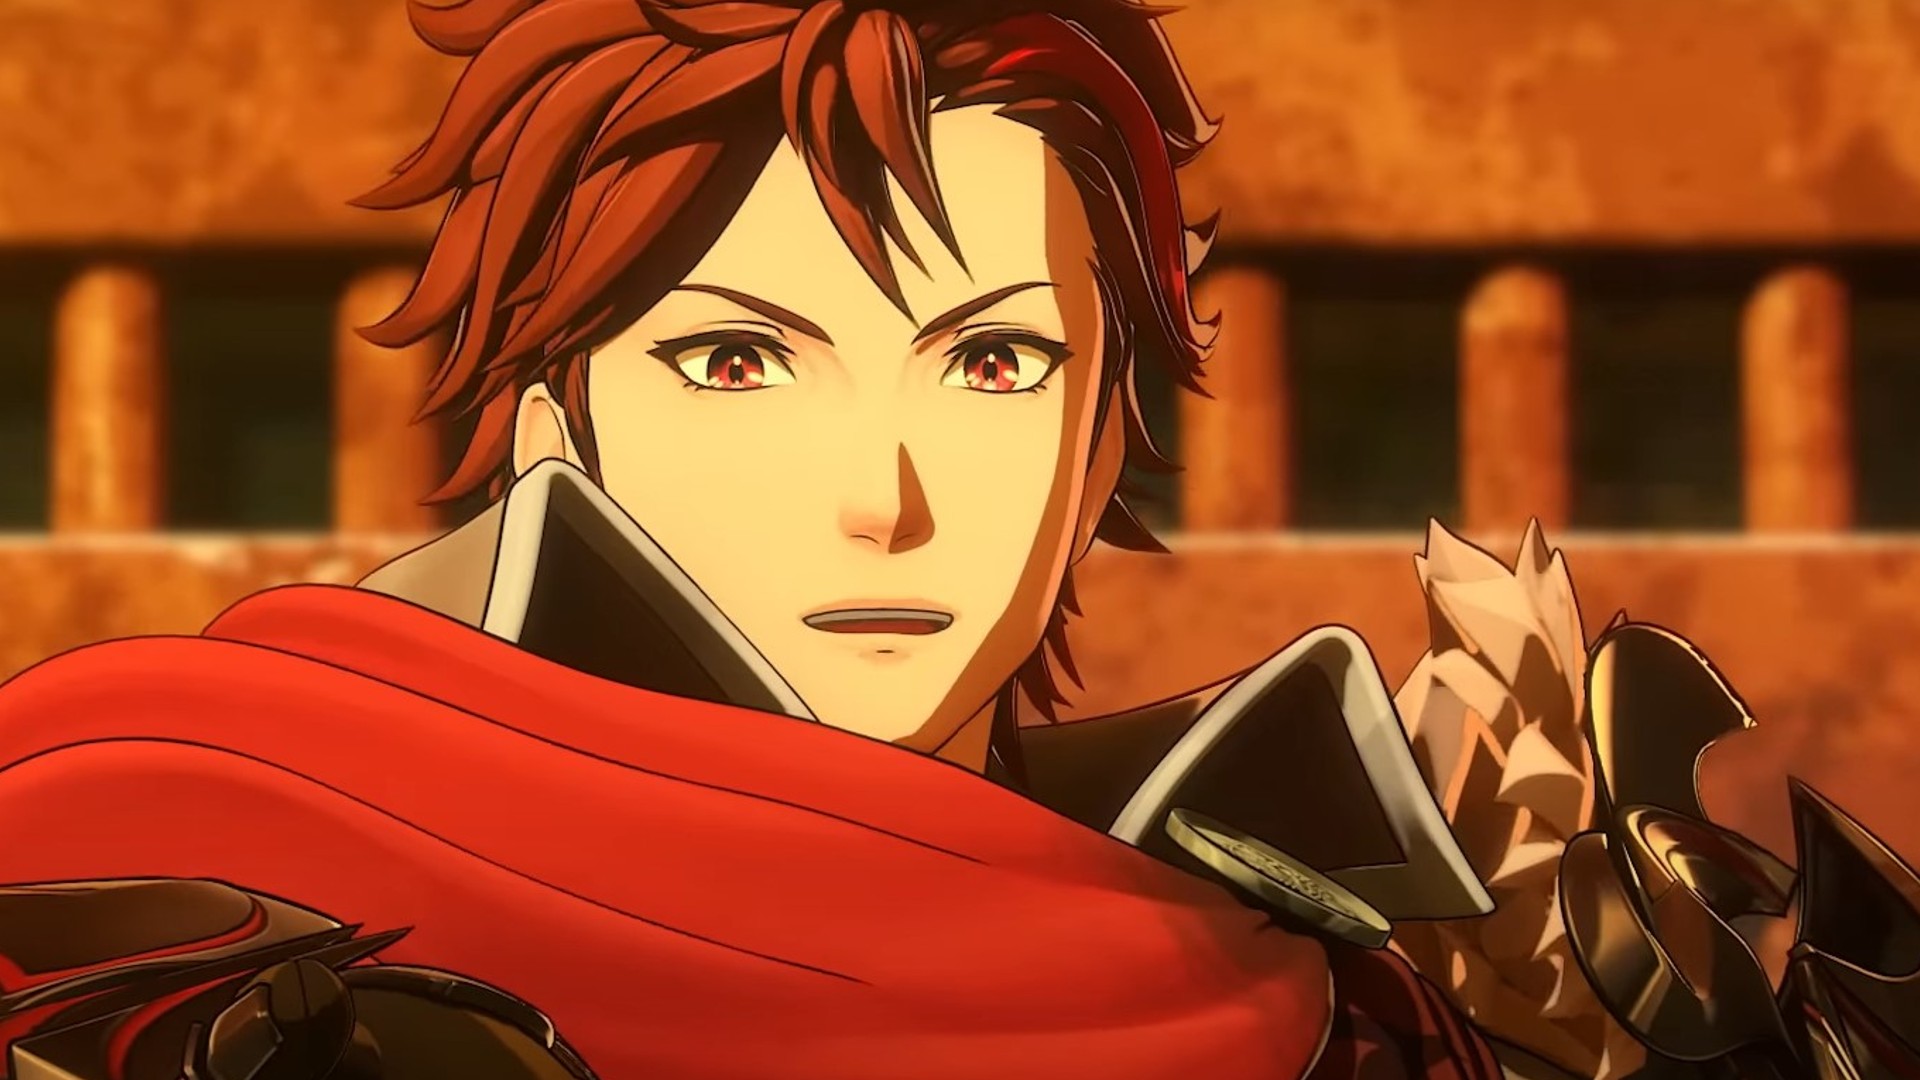 Fire Emblem Engage release time approaches as JRPG nears launch